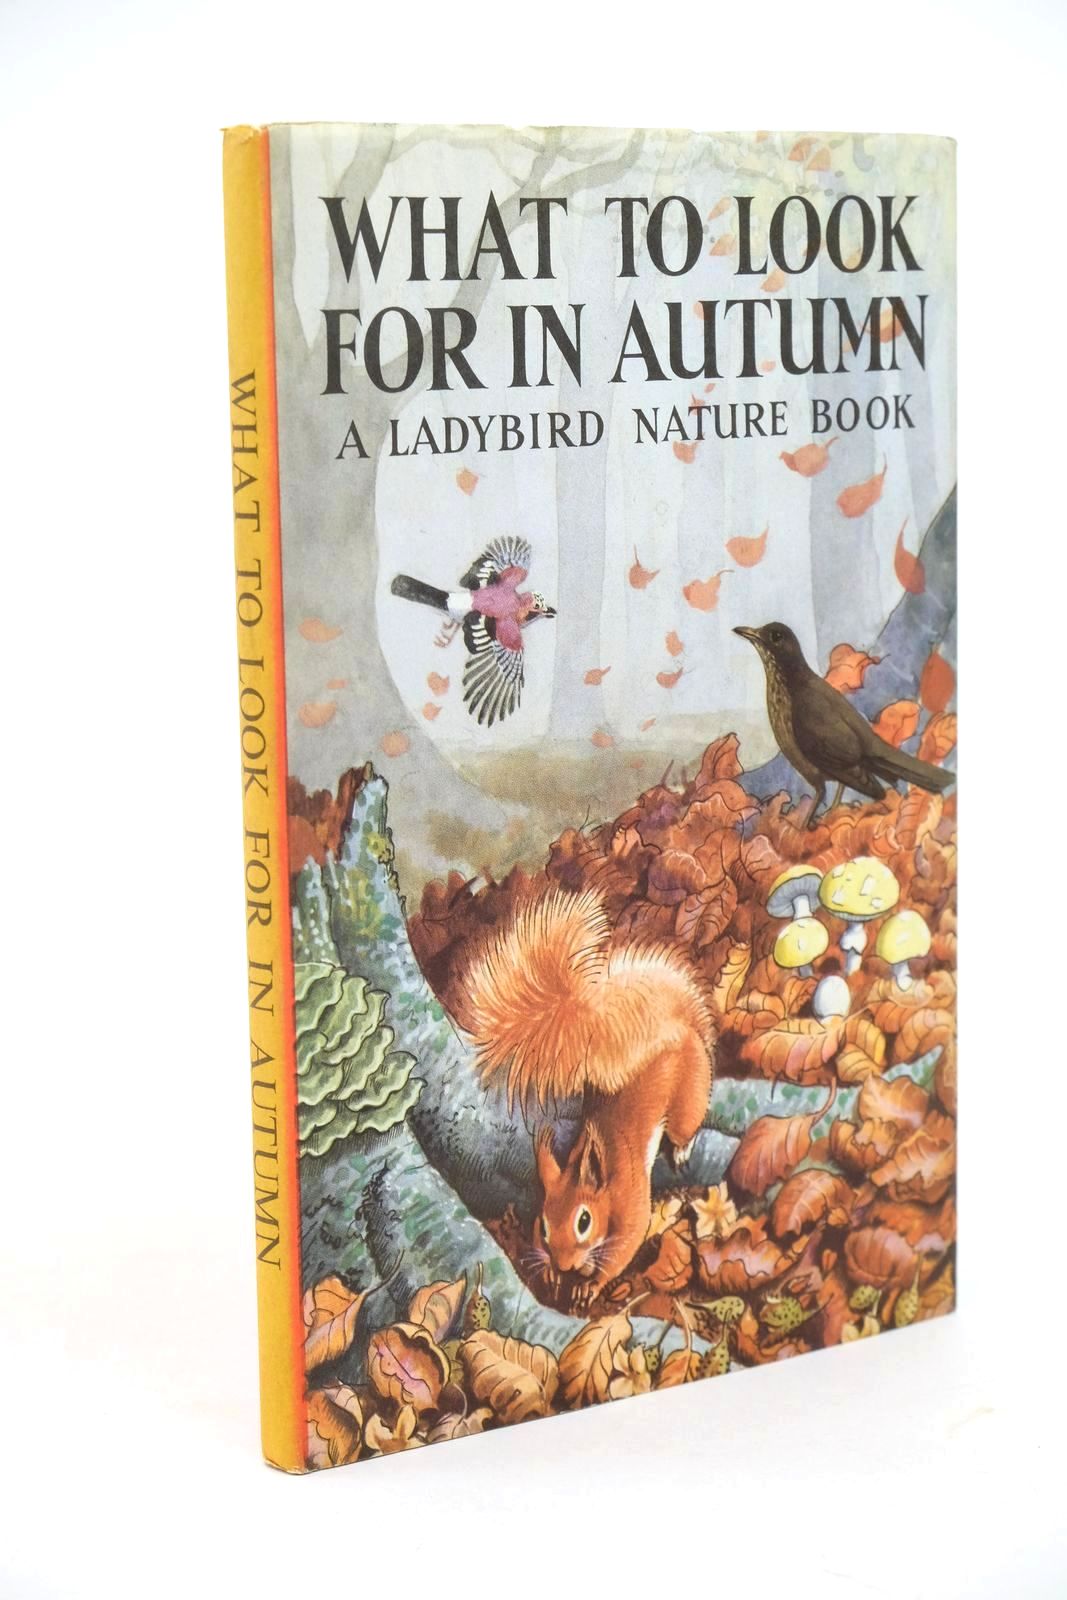 Photo of WHAT TO LOOK FOR IN AUTUMN written by Watson, E.L. Grant illustrated by Tunnicliffe, C.F. published by Wills & Hepworth Ltd. (STOCK CODE: 1323147)  for sale by Stella & Rose's Books